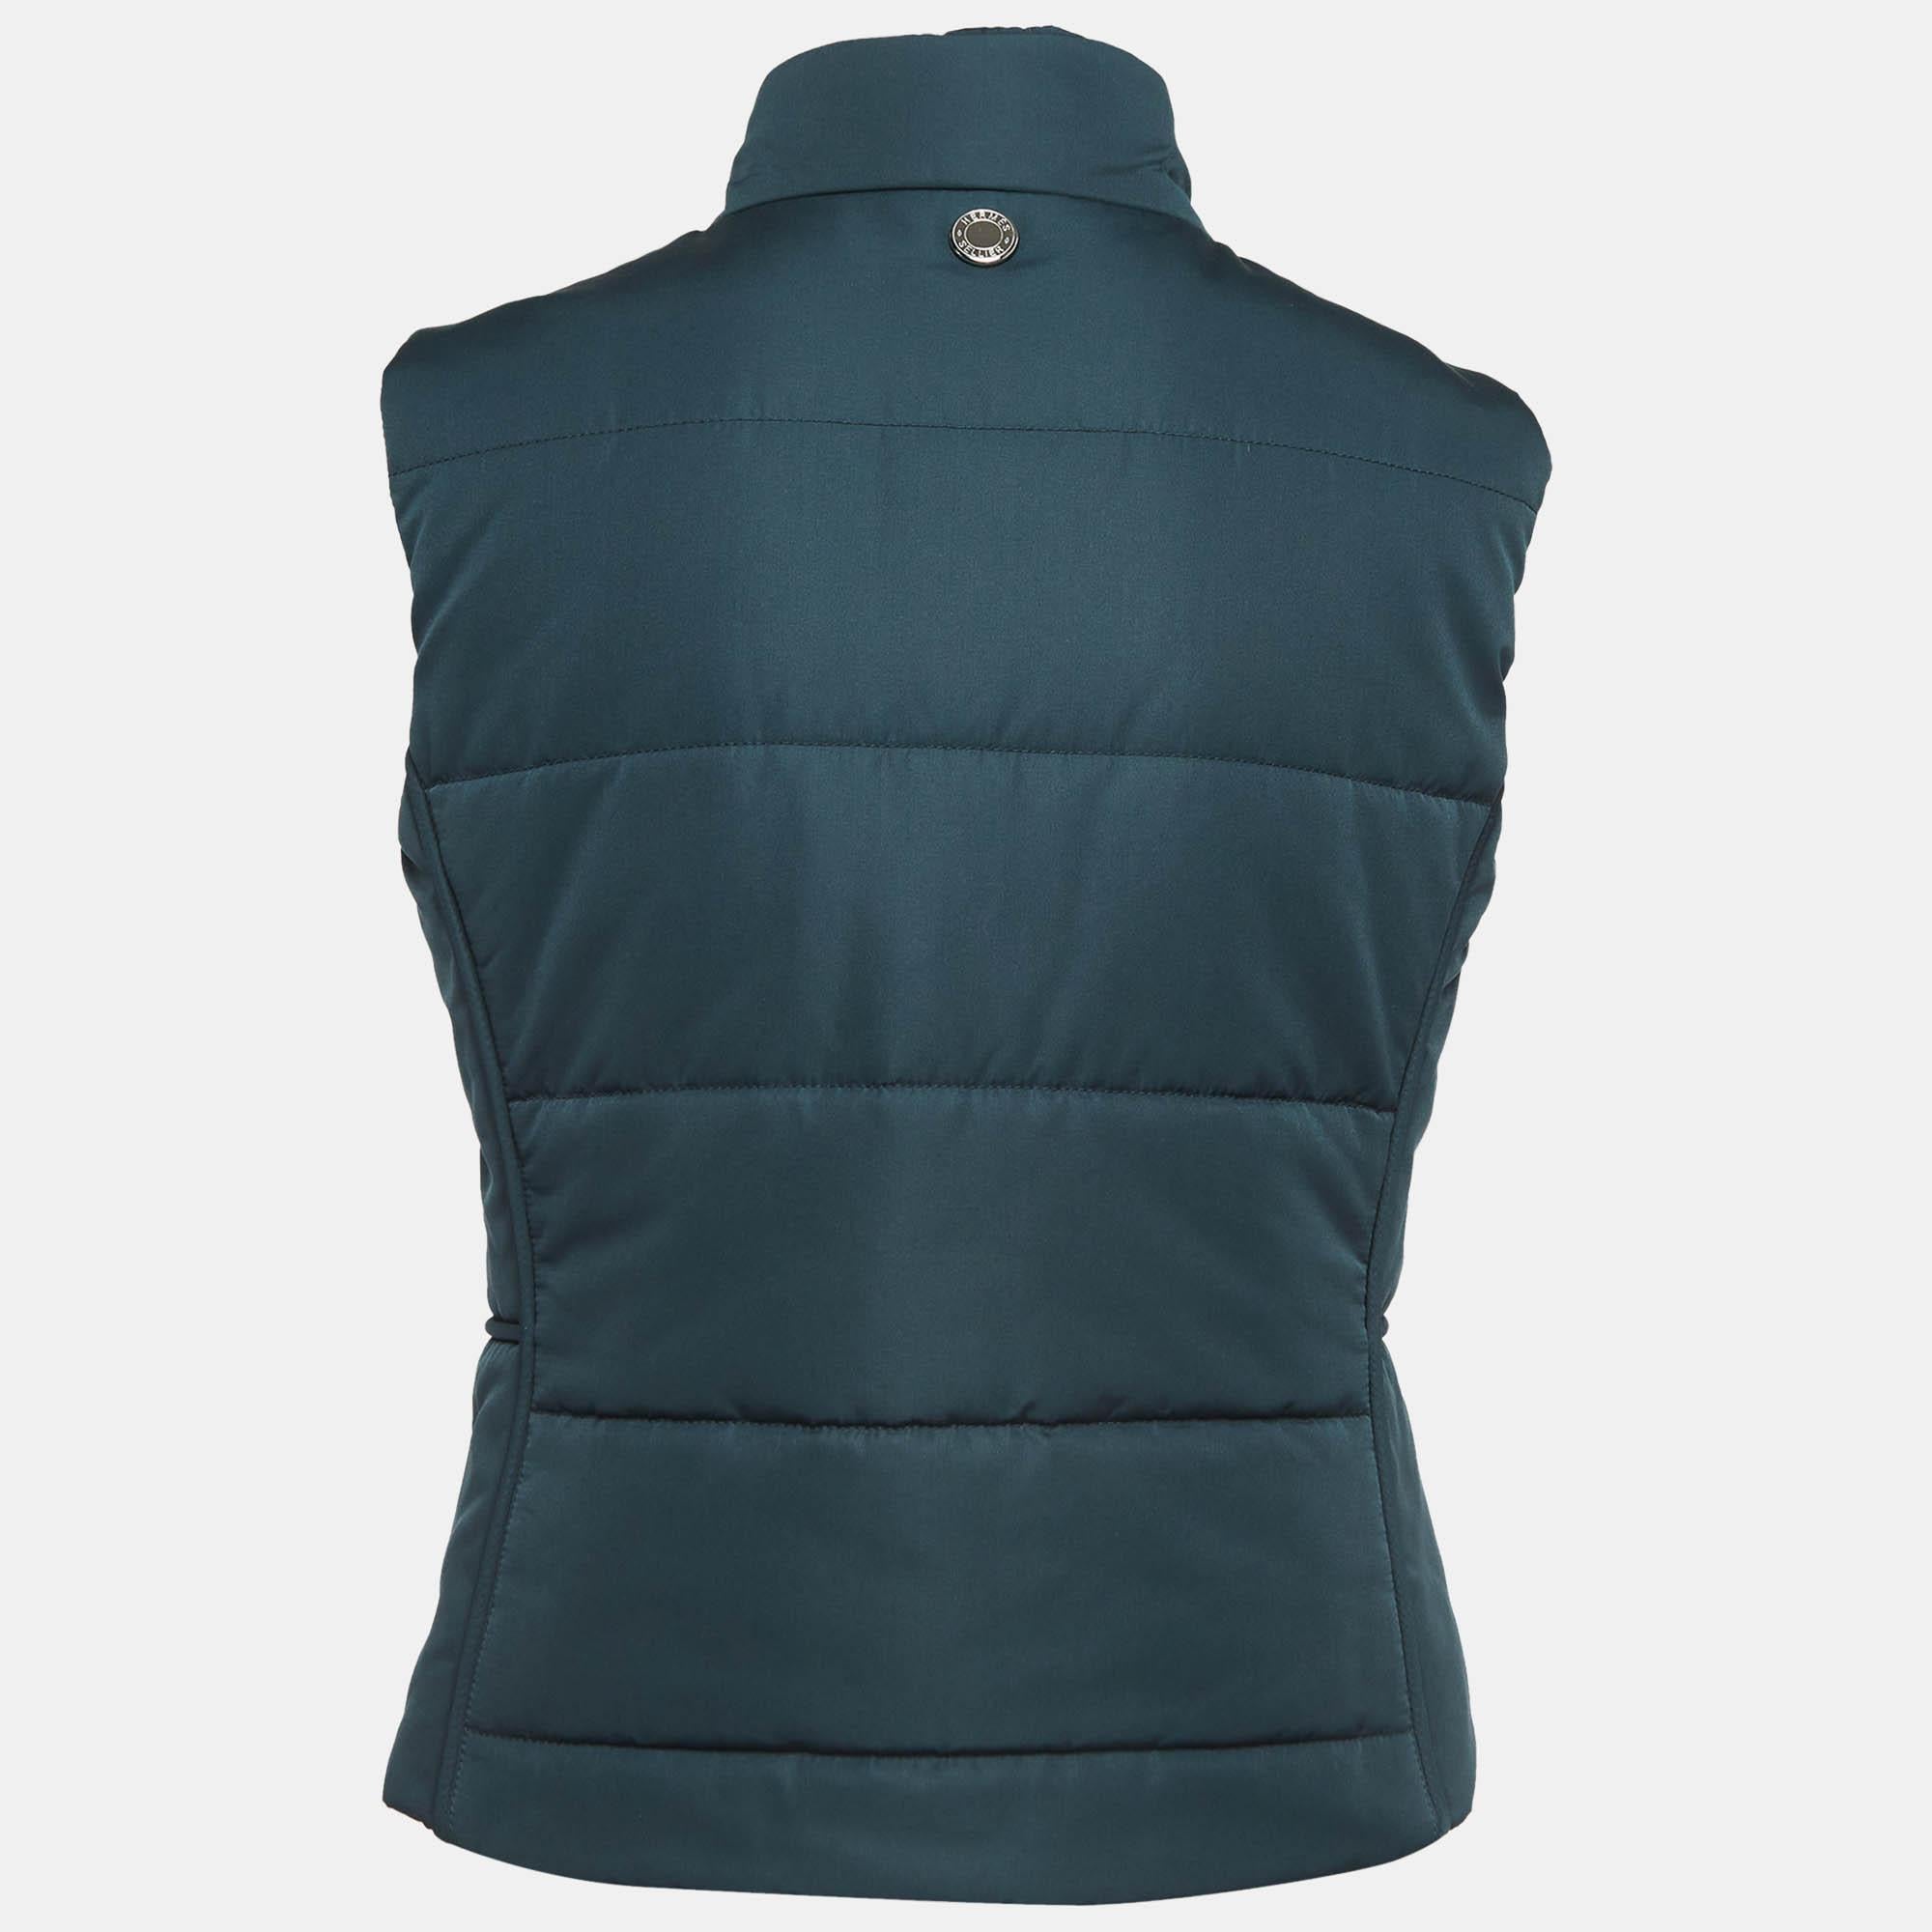 Wrap yourself in the refined luxury of the Hermès vest. Crafted with precision and finesse, this vest boasts a sleek silhouette and quilted design. Its vibrant teal hue adds a pop of color to any ensemble, while the sleeveless cut offers versatility